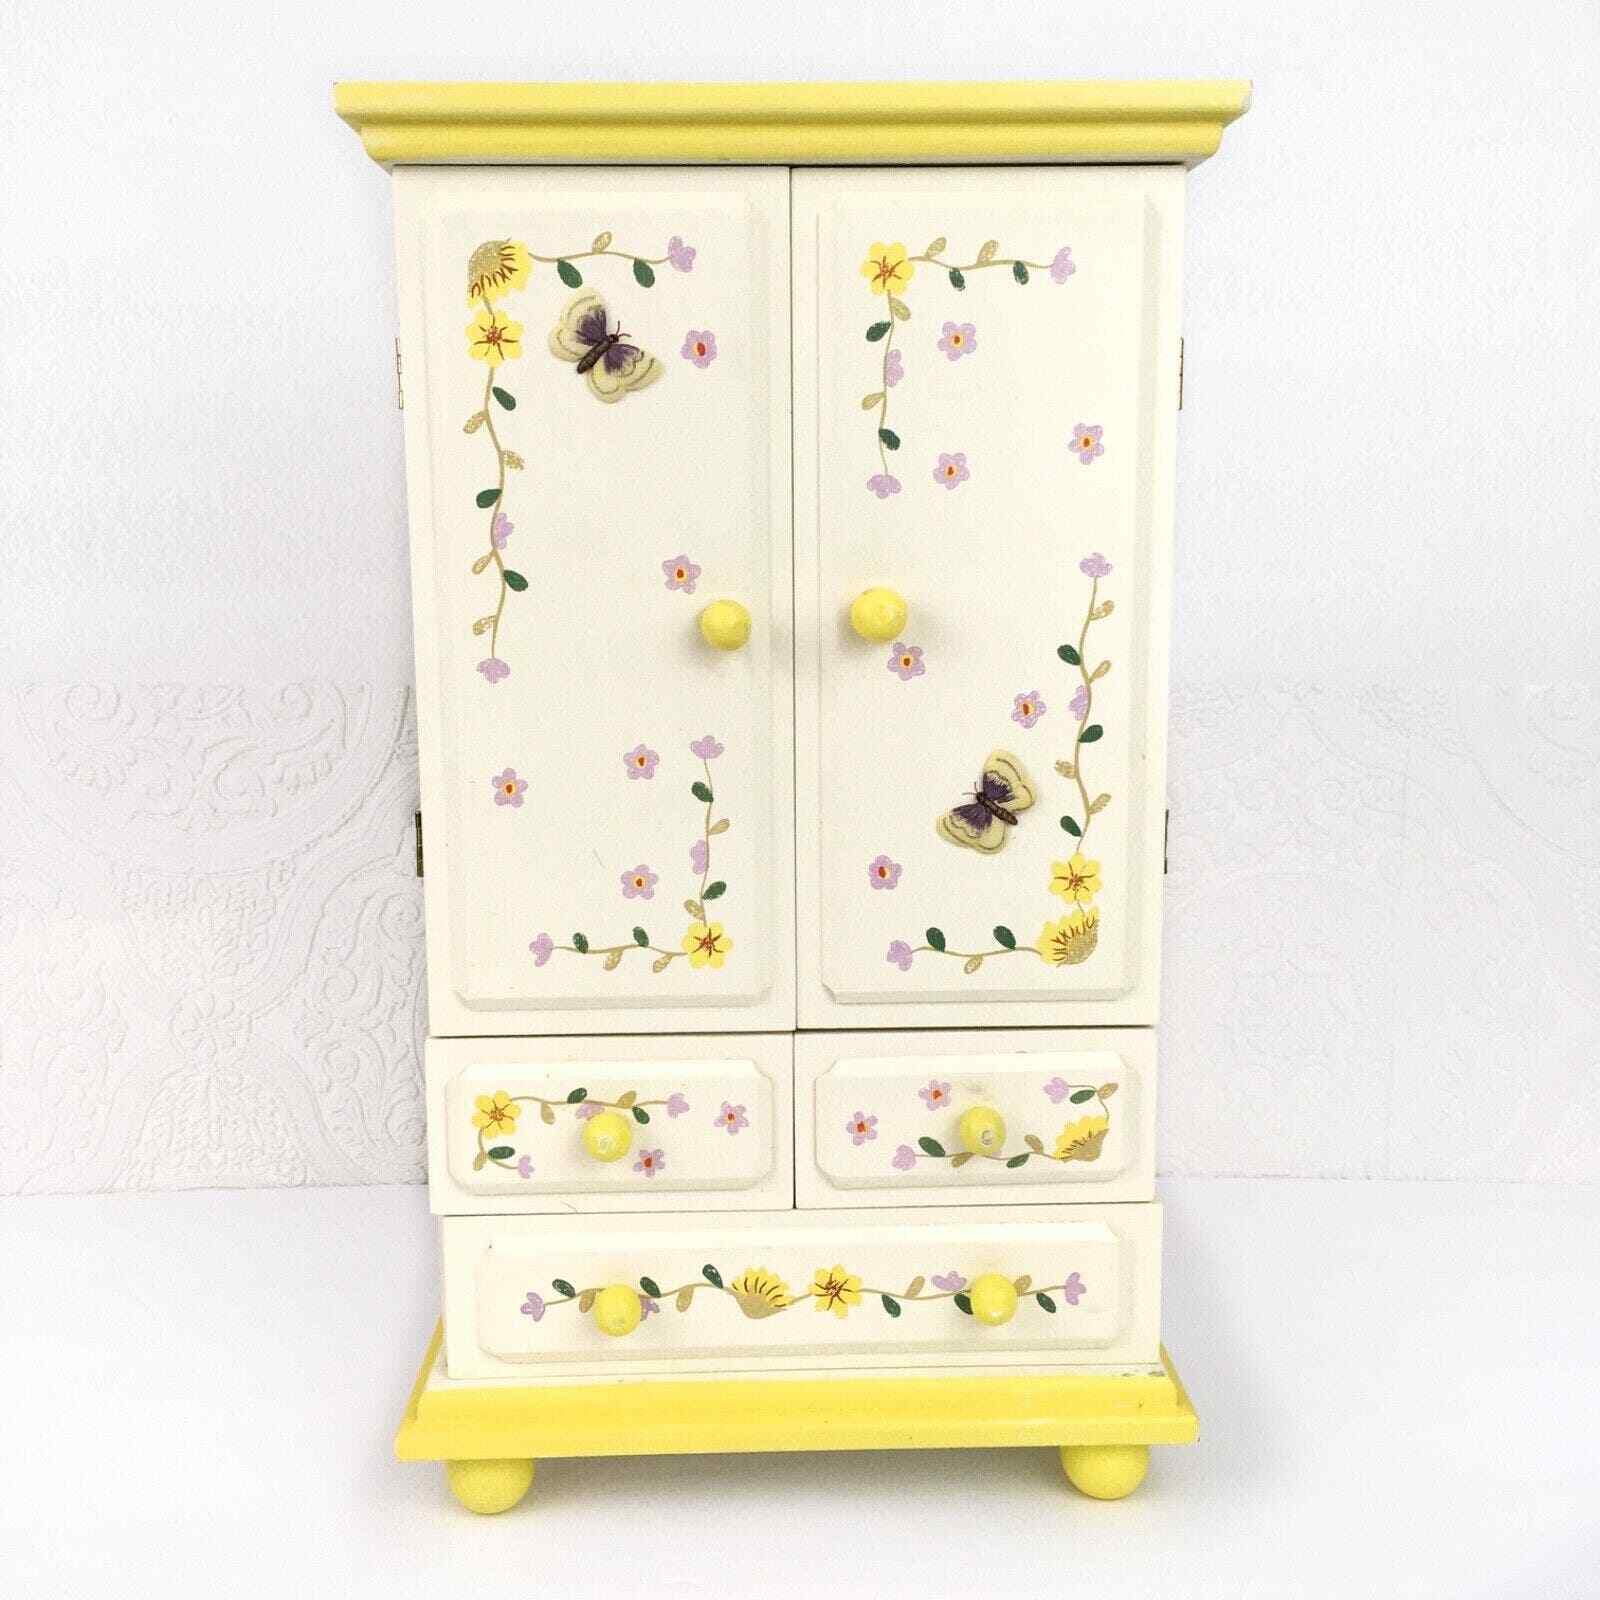 miniature hand painted wooden armoire wardrobe butterfly floral design OPENS